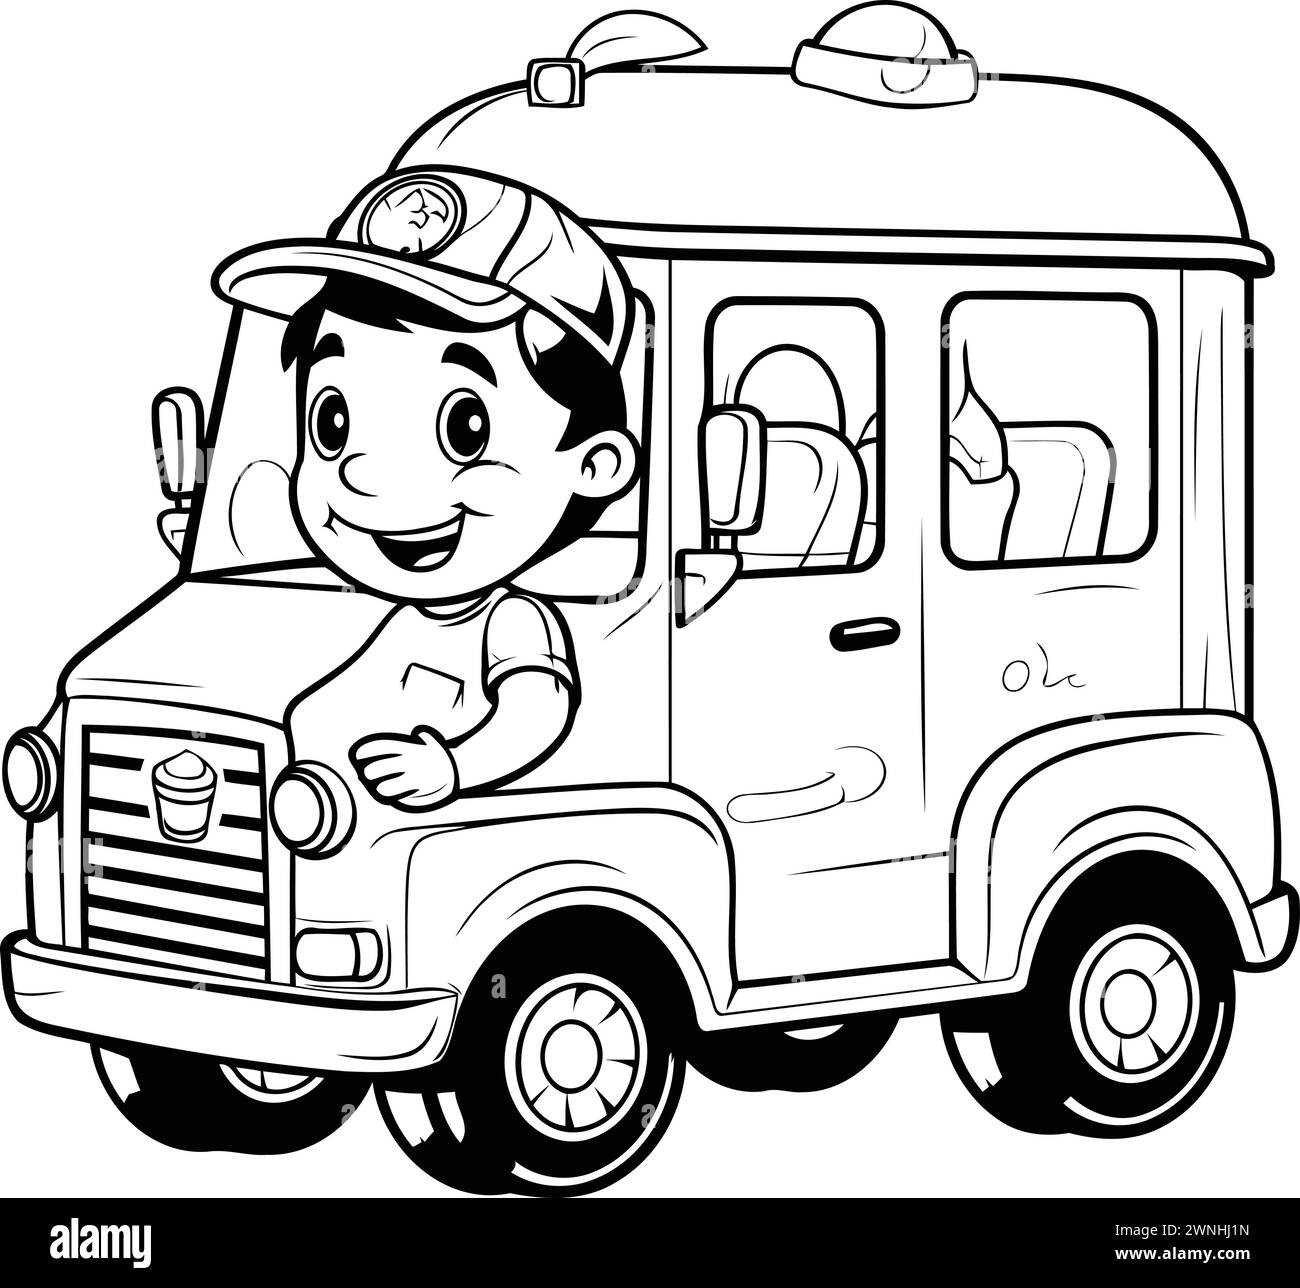 Black and White Cartoon Illustration of a Kid Boy Driving a Fast Food Truck or Van for Coloring Book Stock Vector